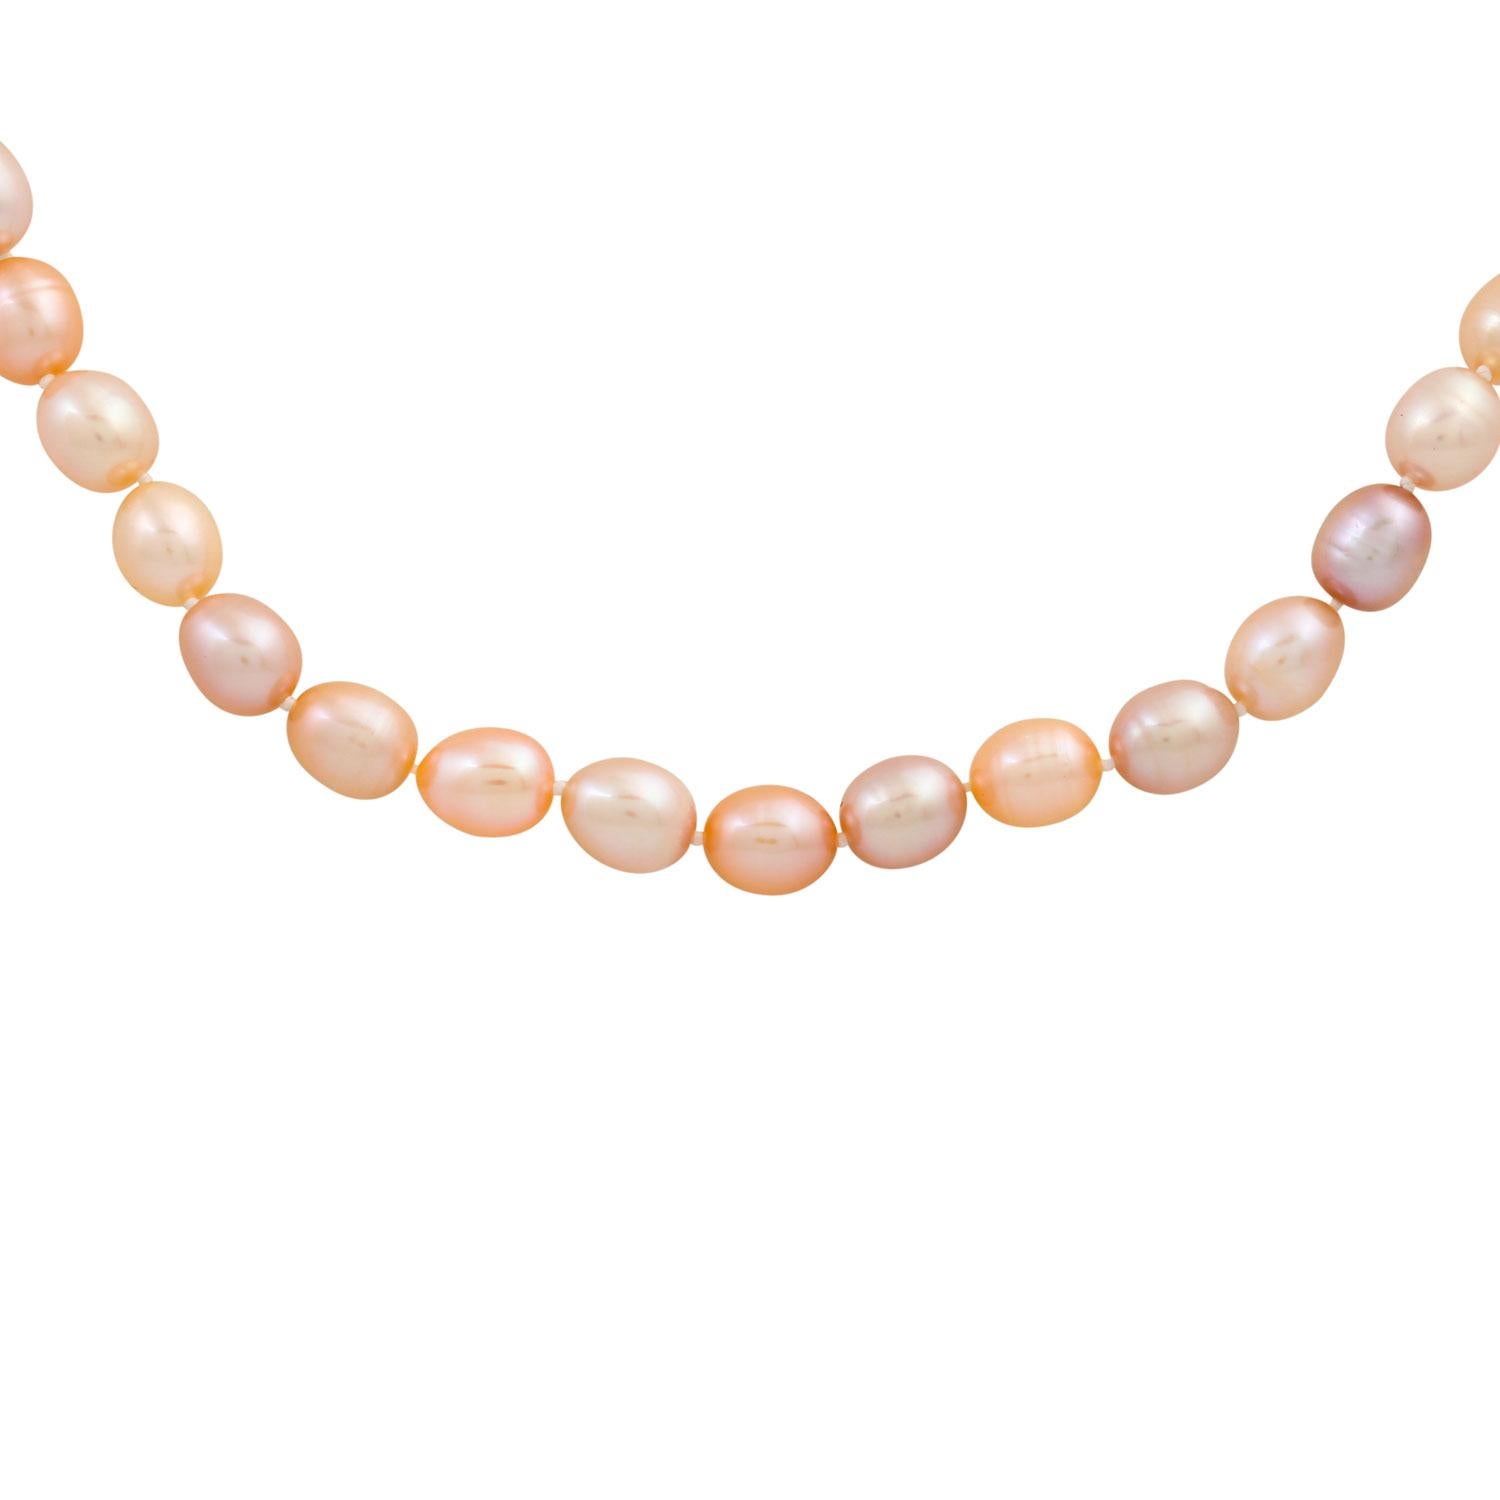 Freshwater pearl necklace, multicolored, magnetic clasp 925 silver. L.: approx. 50 cm.
